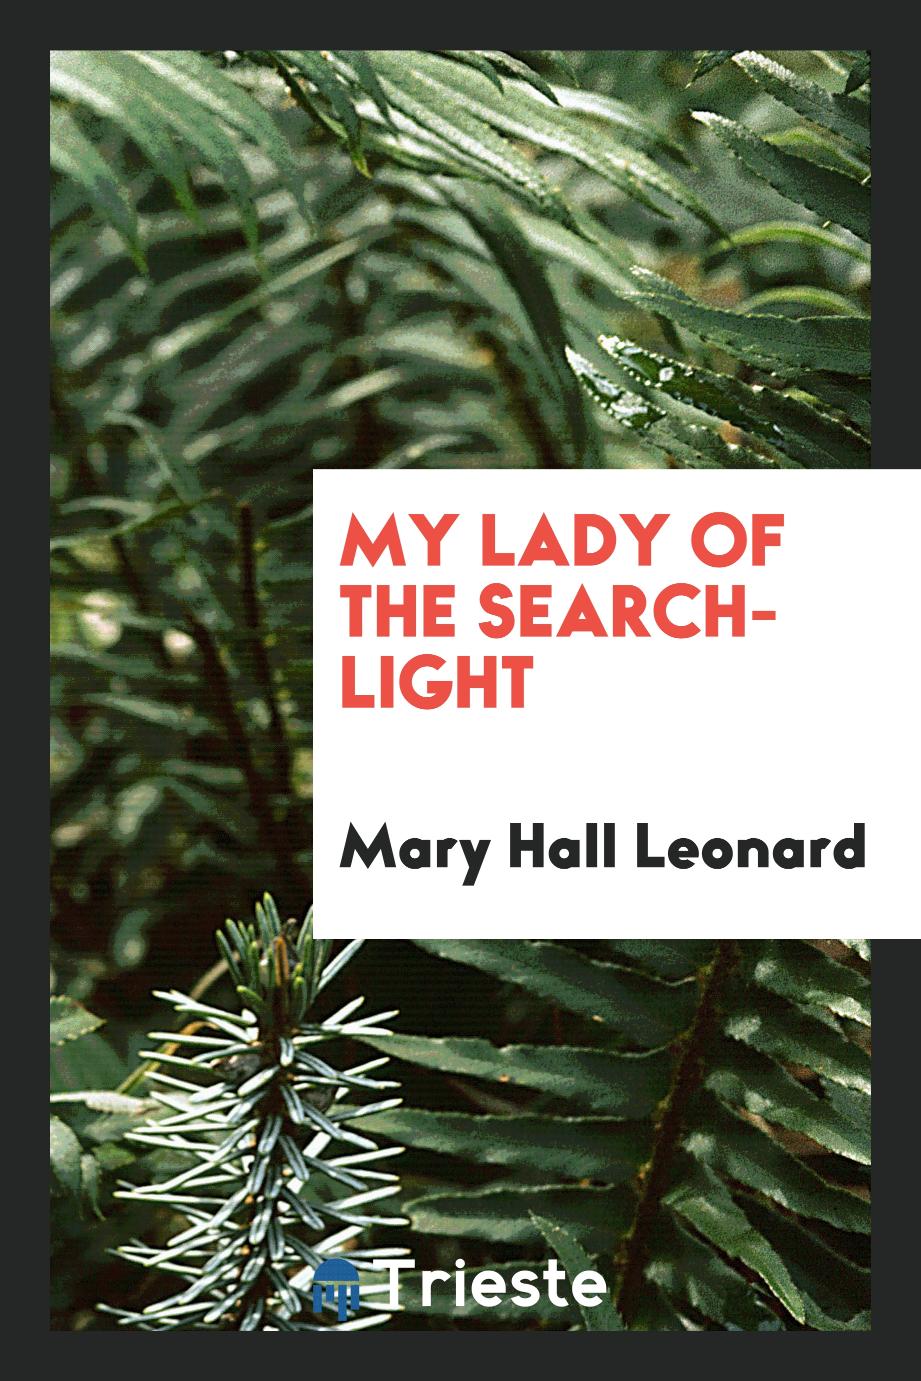 My Lady of the Search-light